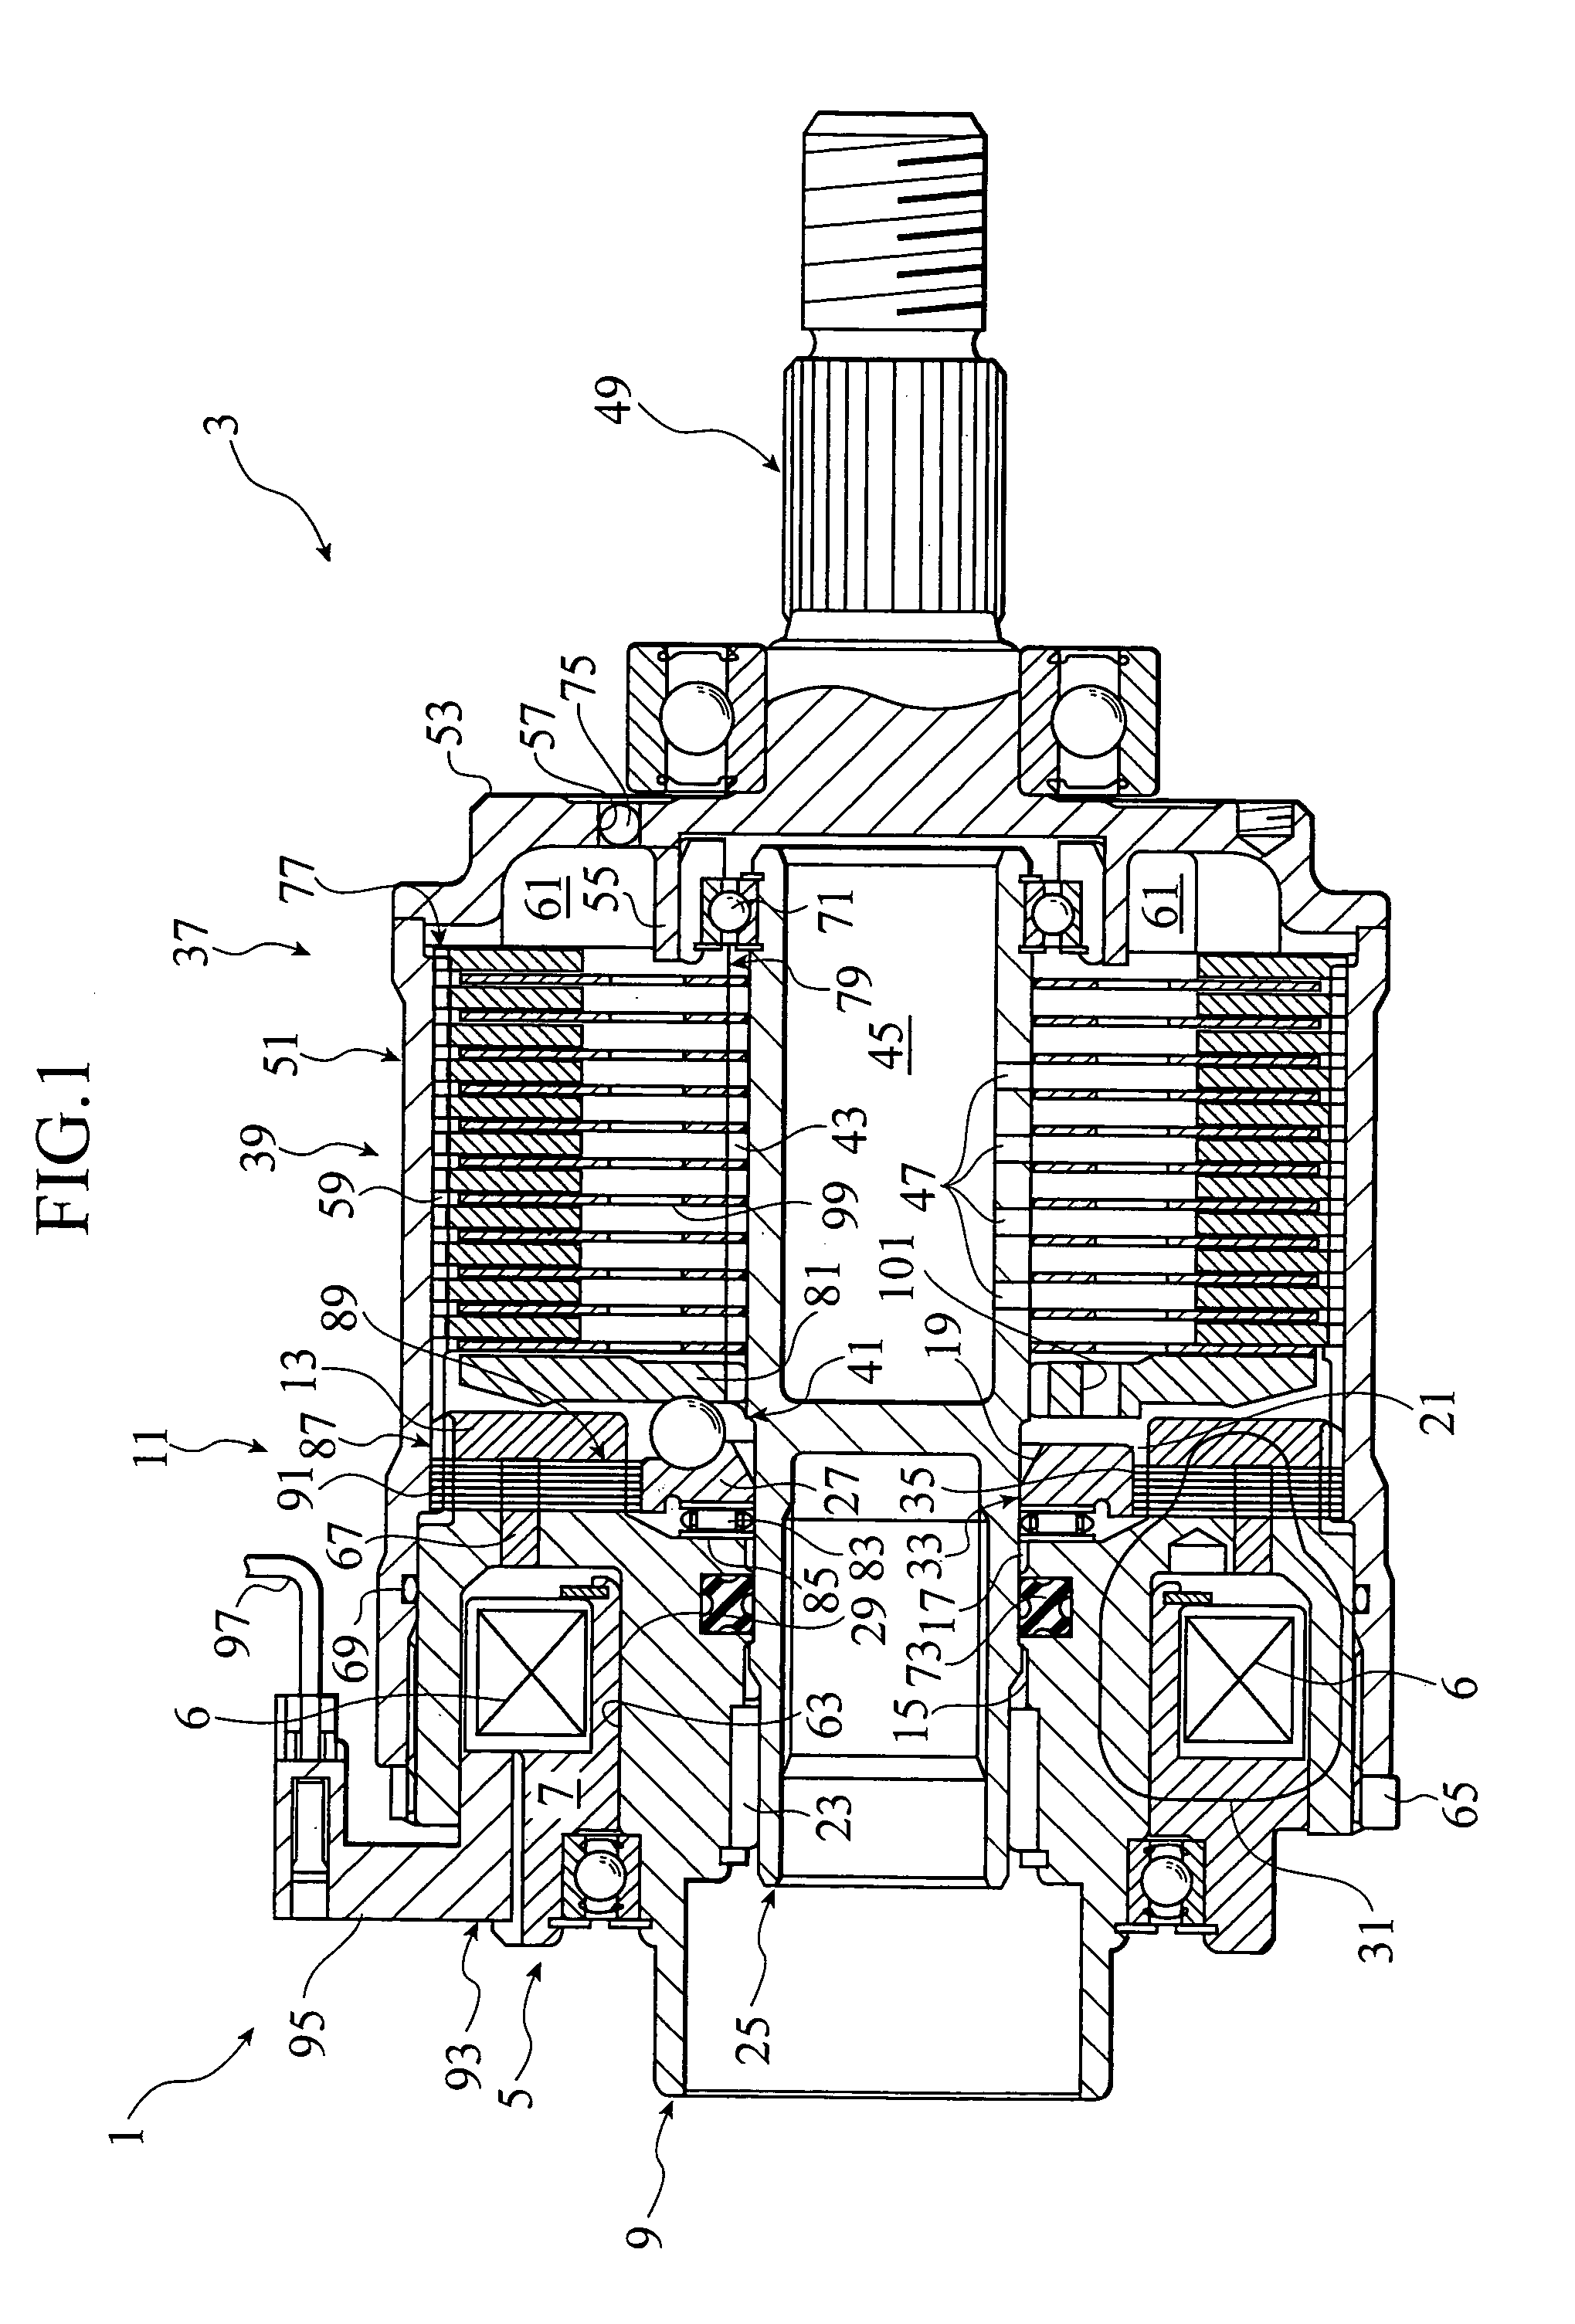 Electromagnetic clutch device